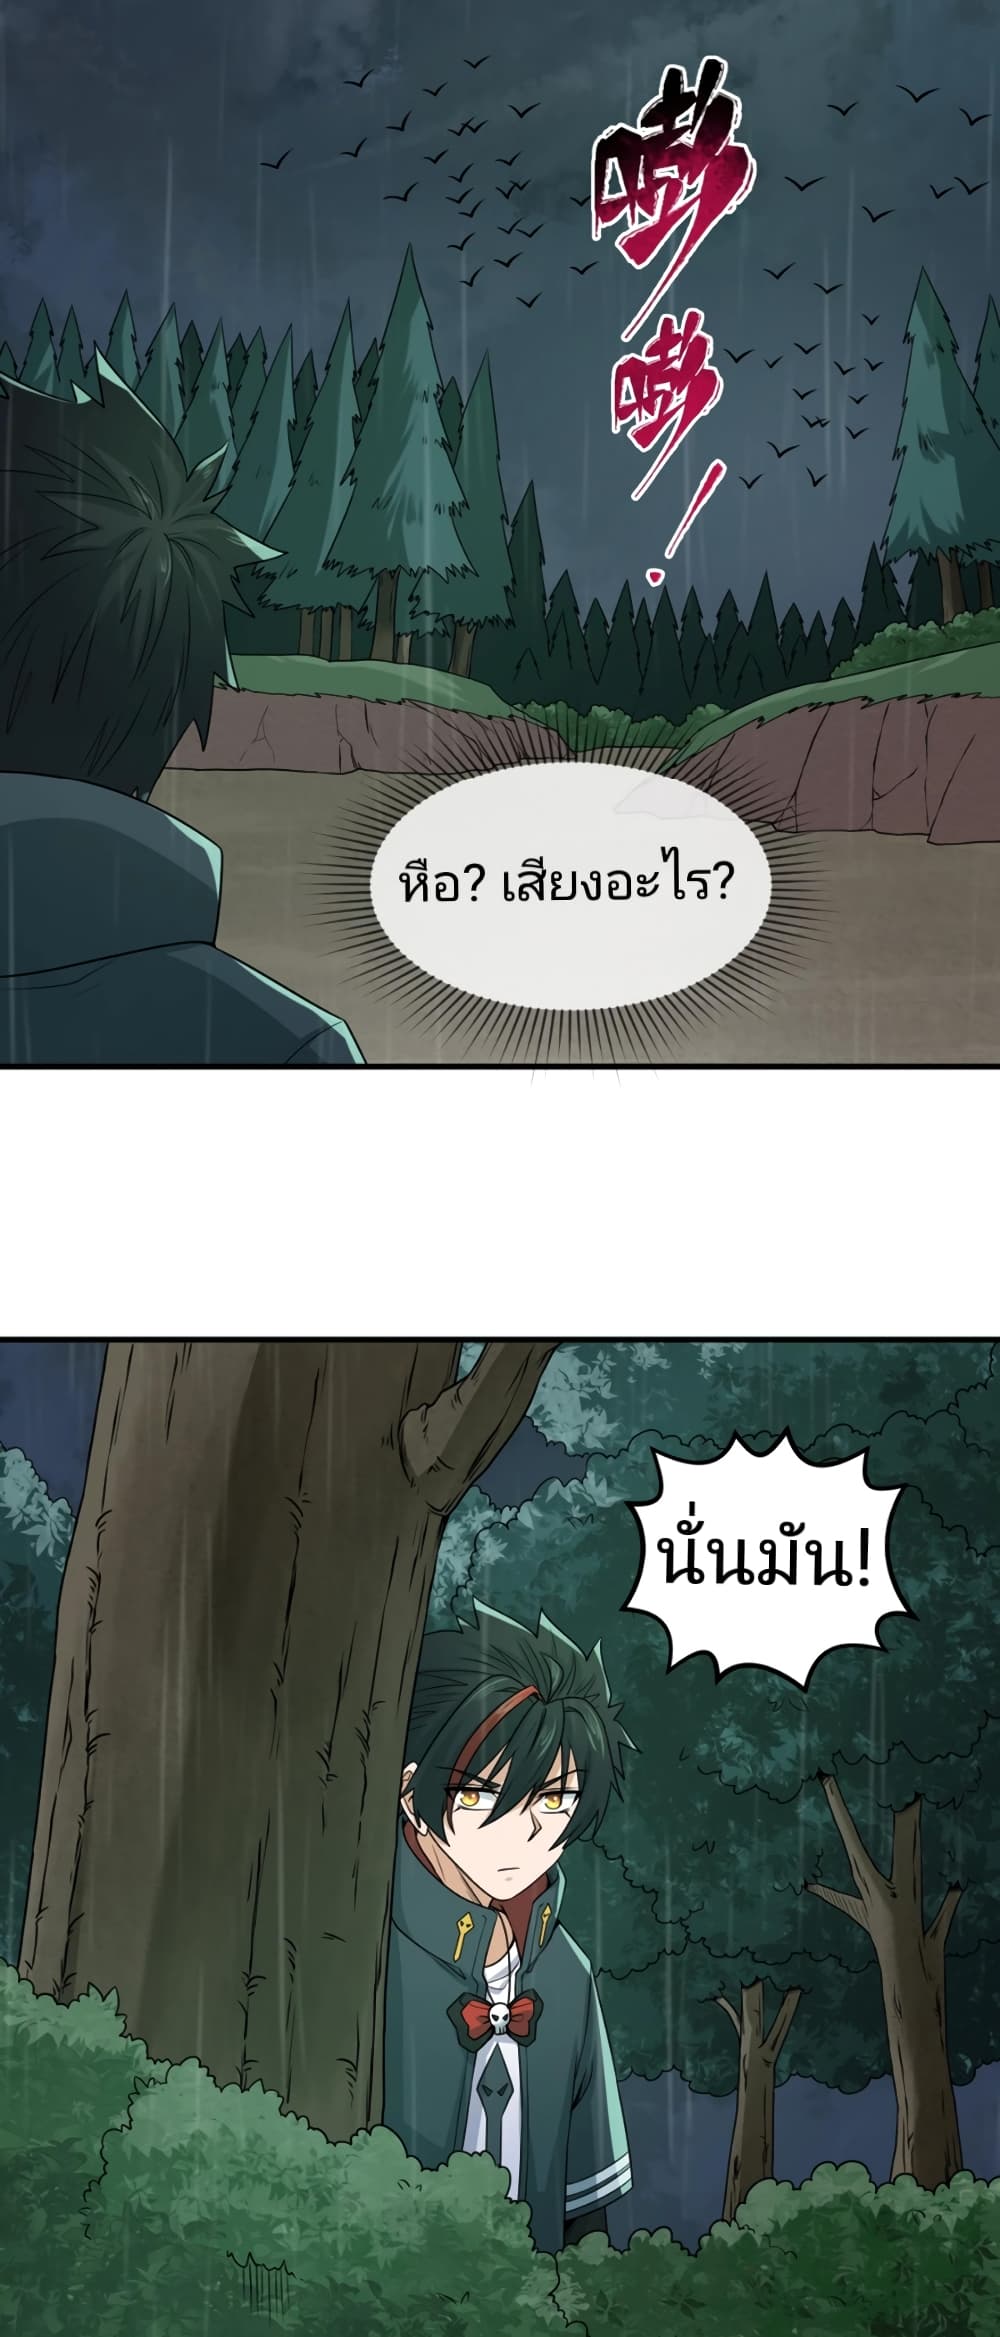 The Age of Ghost Spirits à¸à¸­à¸à¸à¸µà¹ 23 (14)